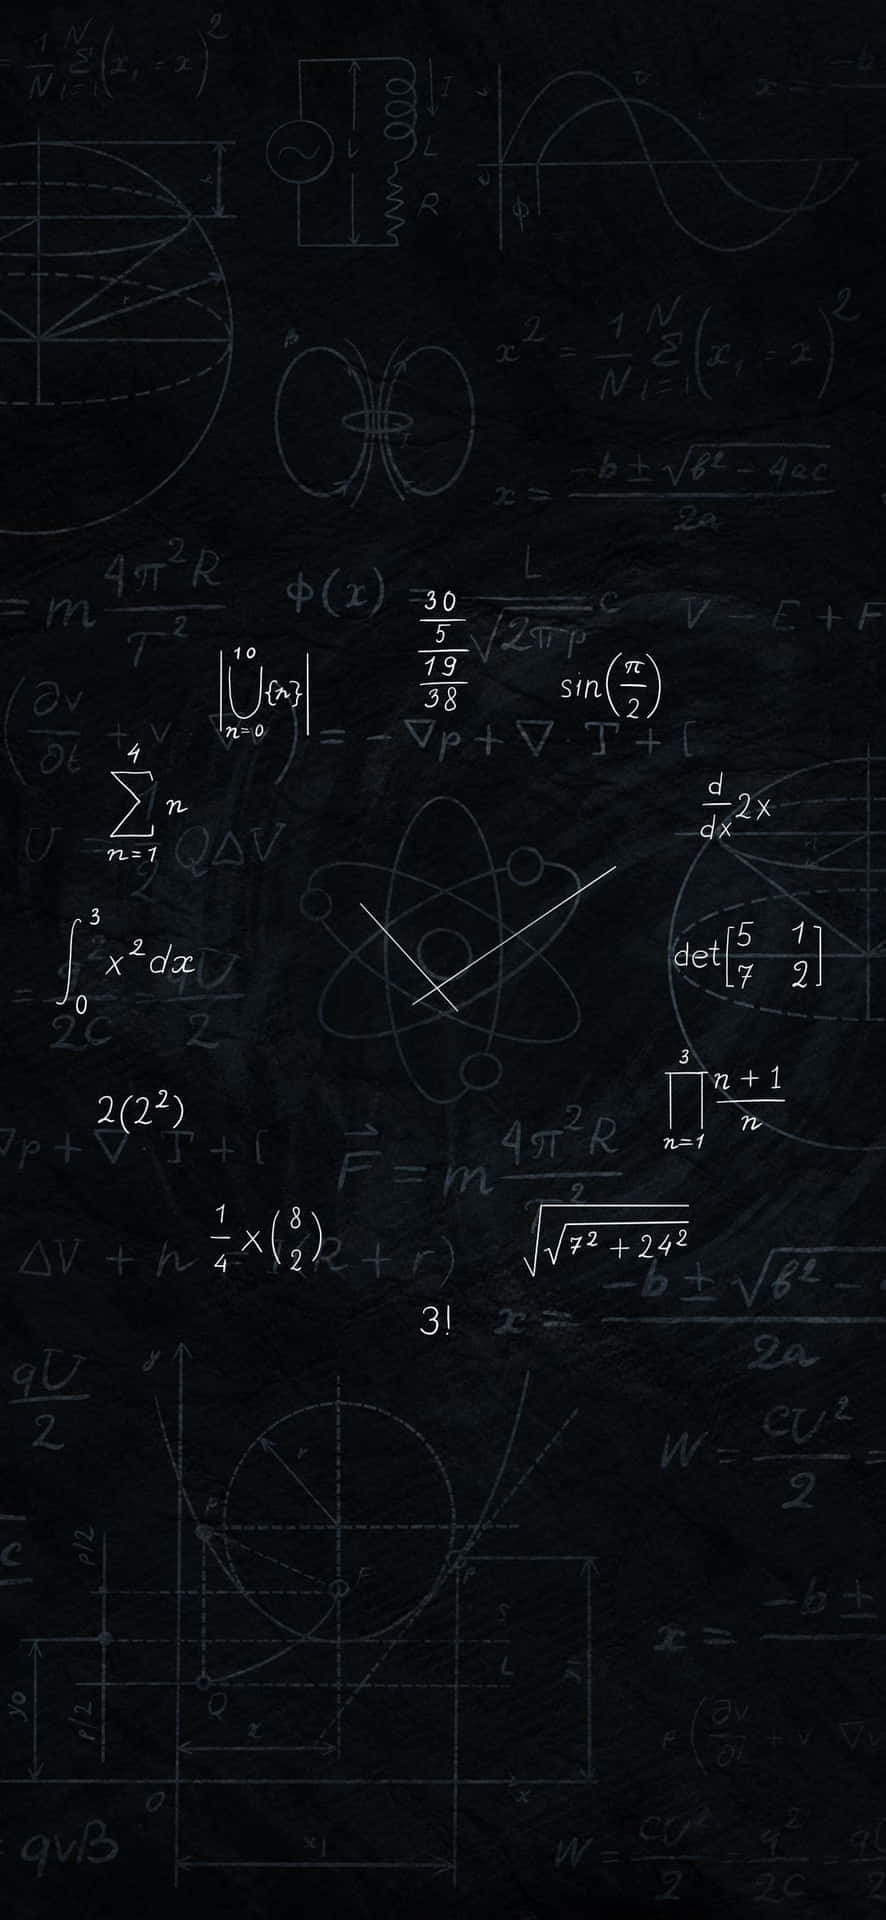 IPhone wallpaper with math equations and formulas on a blackboard background - Math